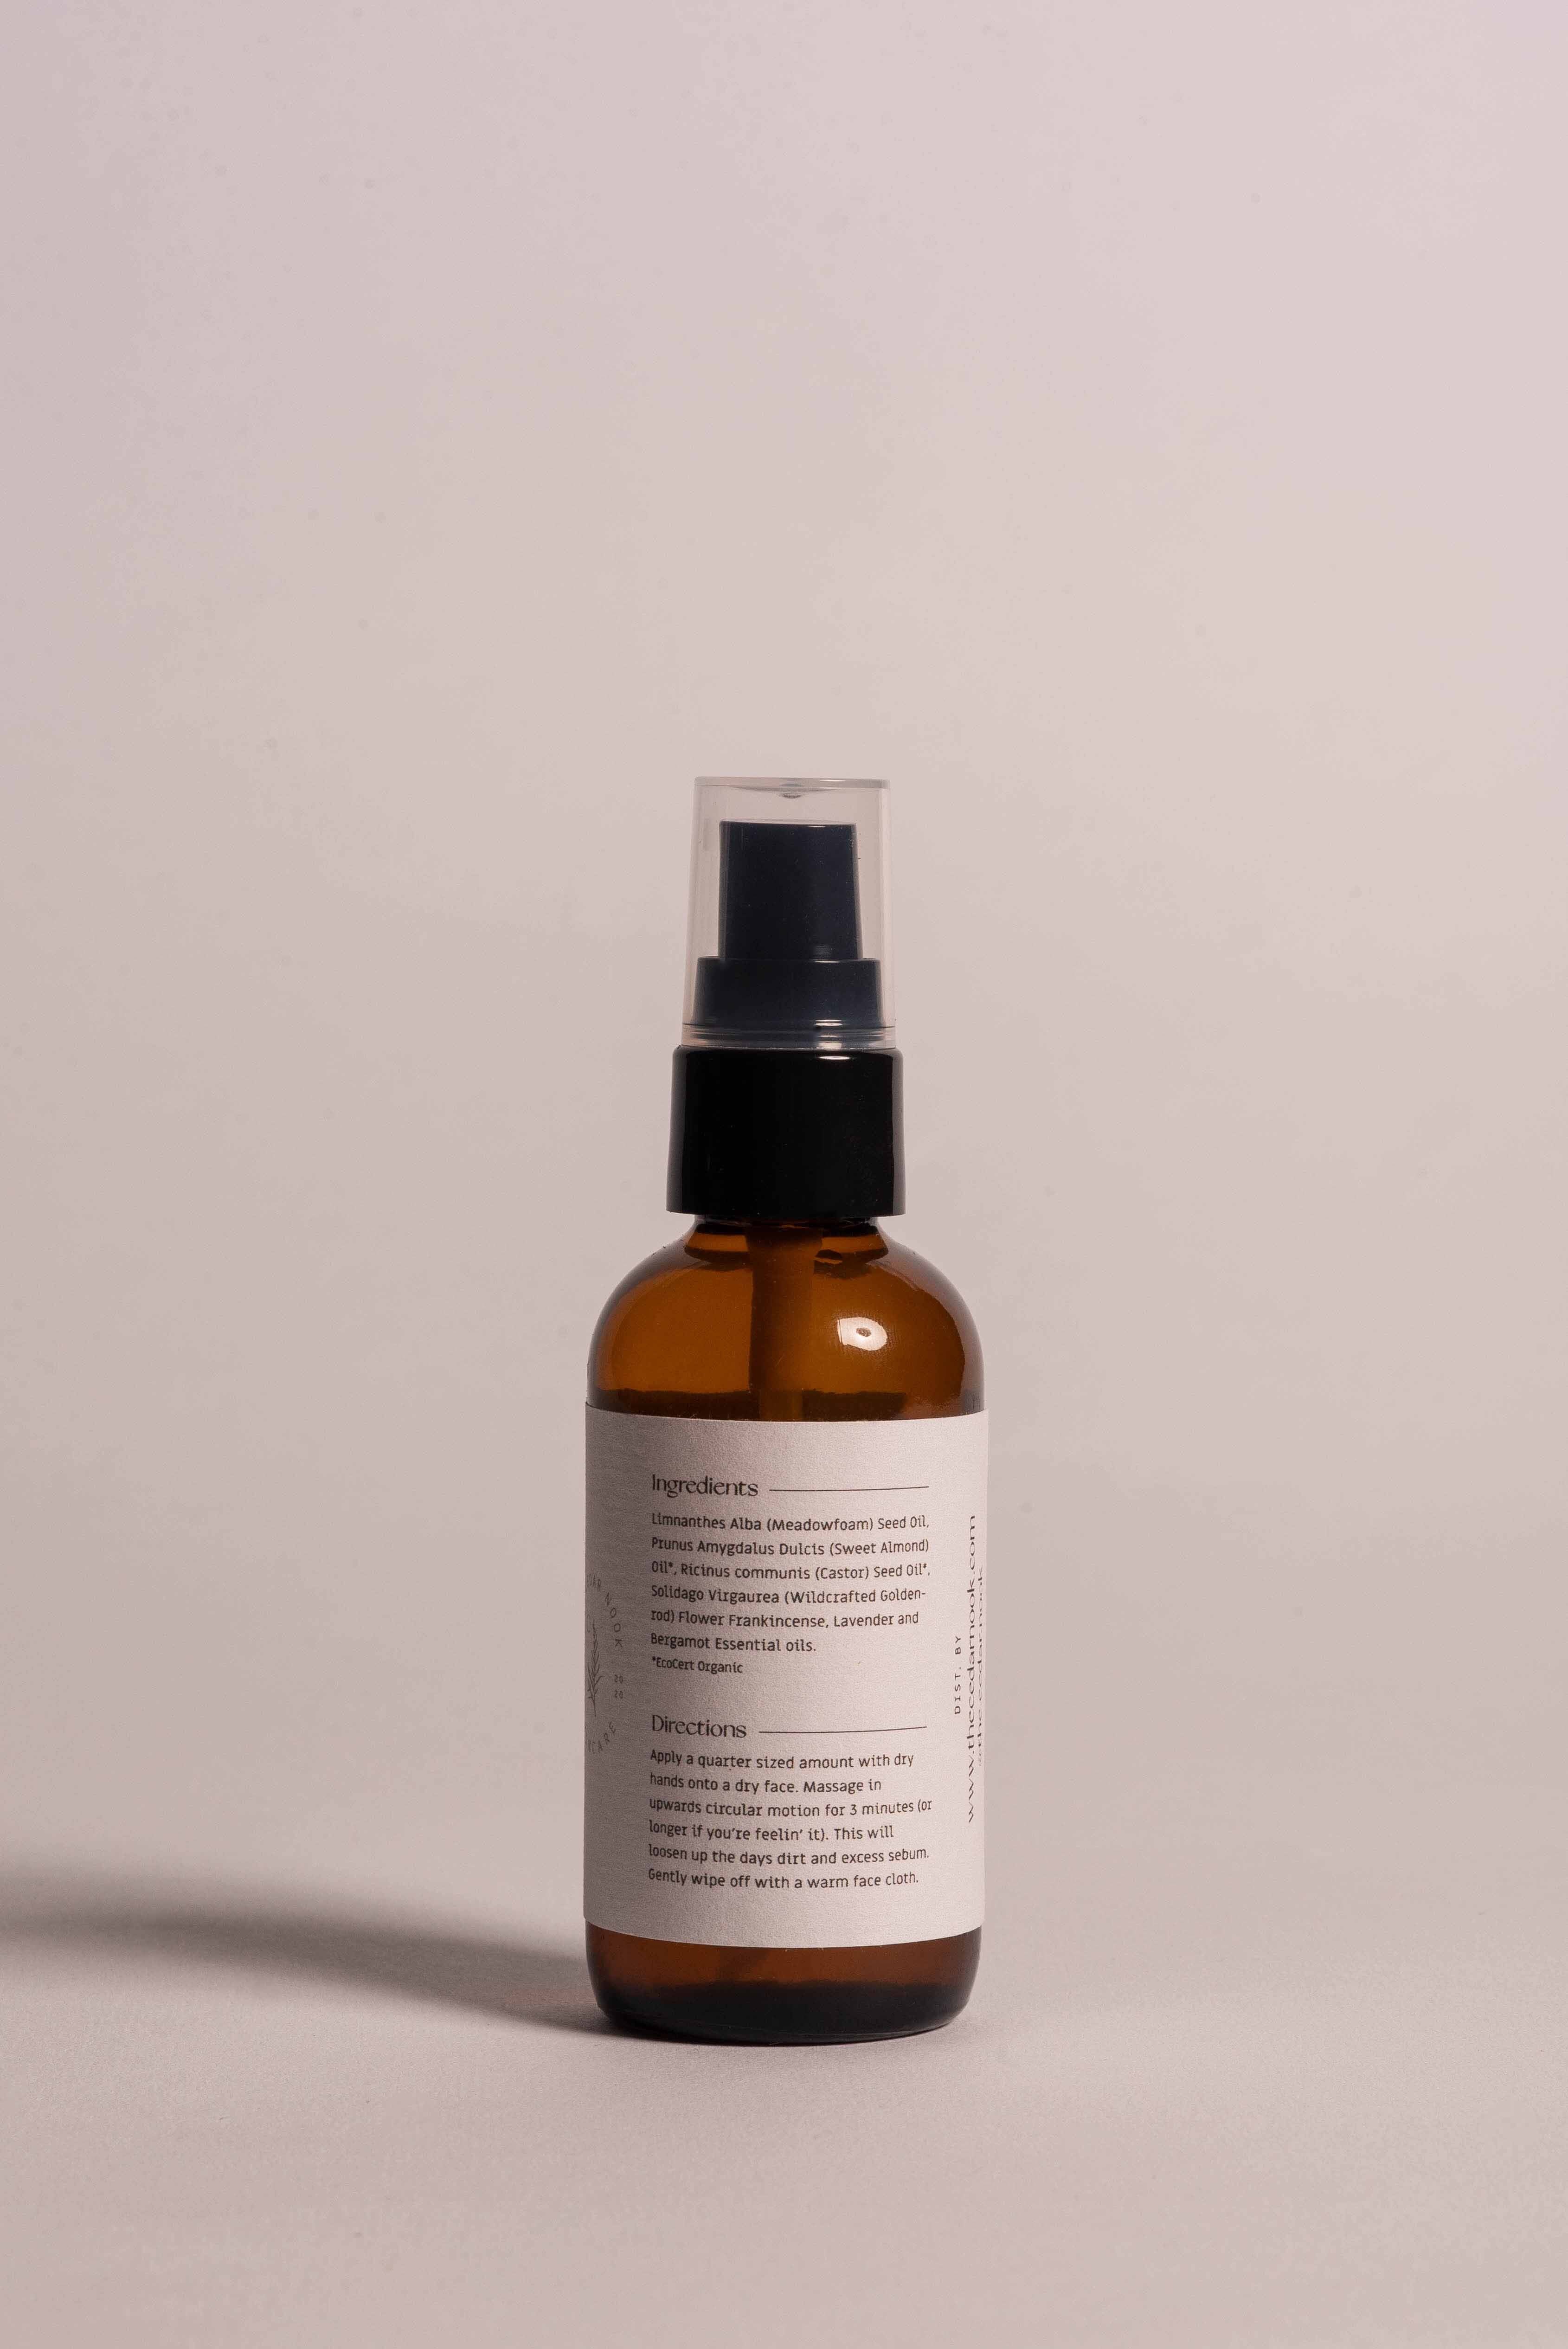 The Cedar Nook Goldenrod Oil Cleanser in 2 oz reusable amber glass bottle with airless pump top showing back label of organic ingredients and directions of use on light pink backdrop